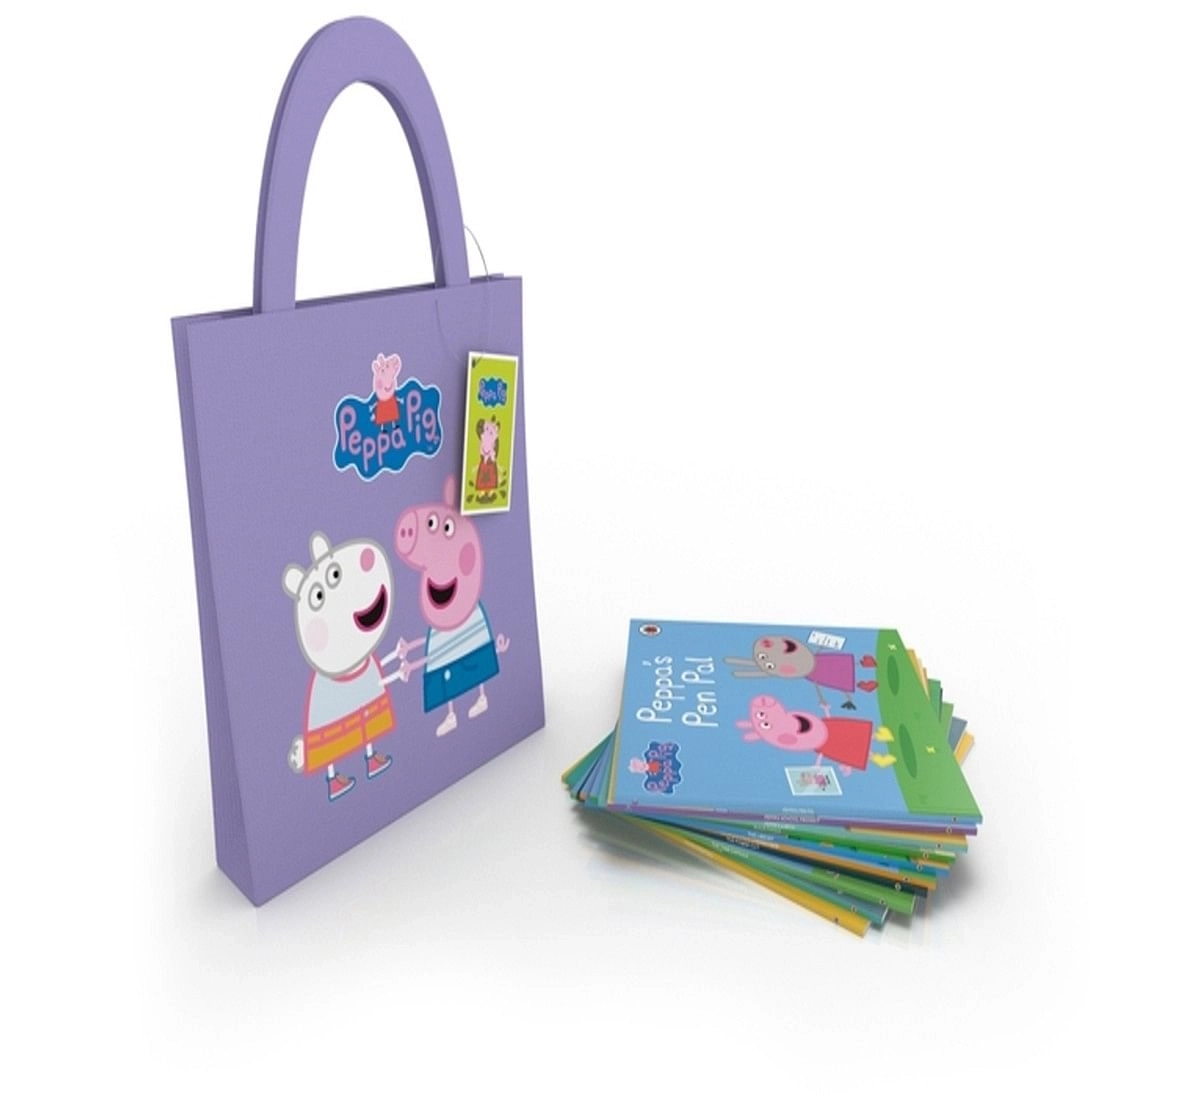 Peppa Purple Bag, 240 Pages Book by Ladybird, Paperback